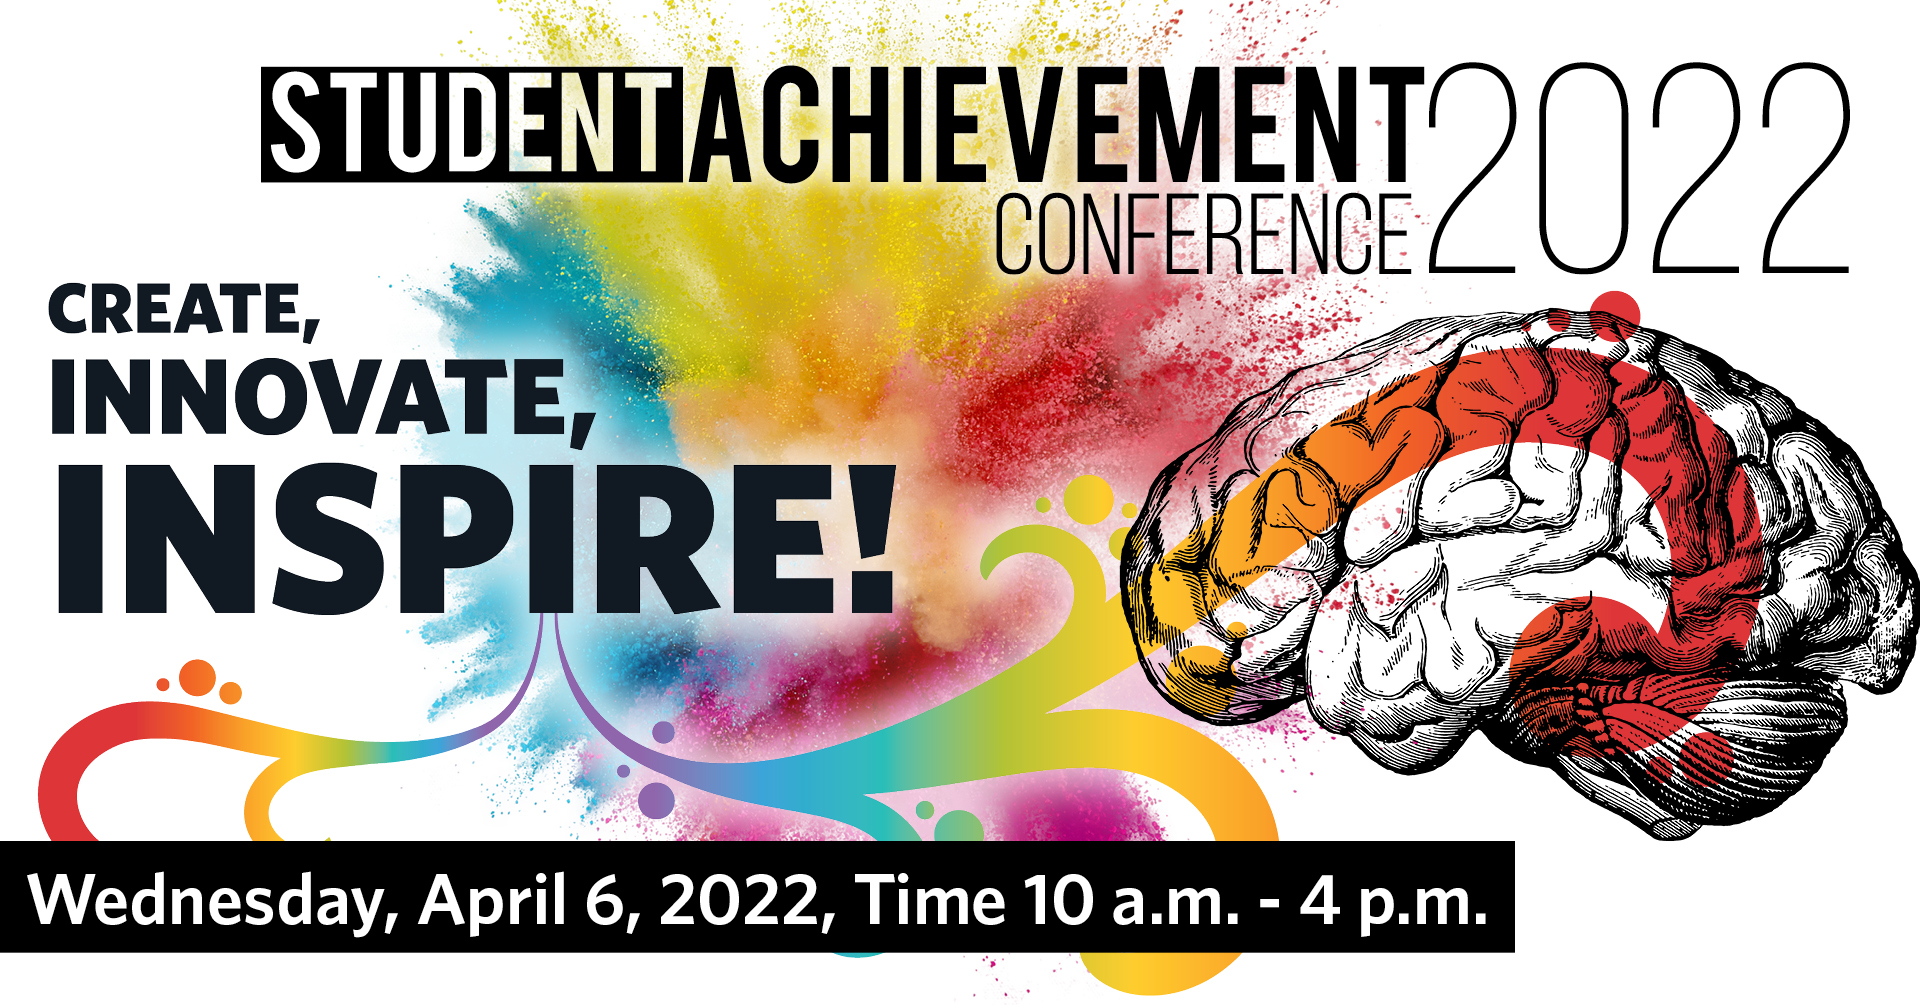 Student Achievement Conference 2022 logo and infographic